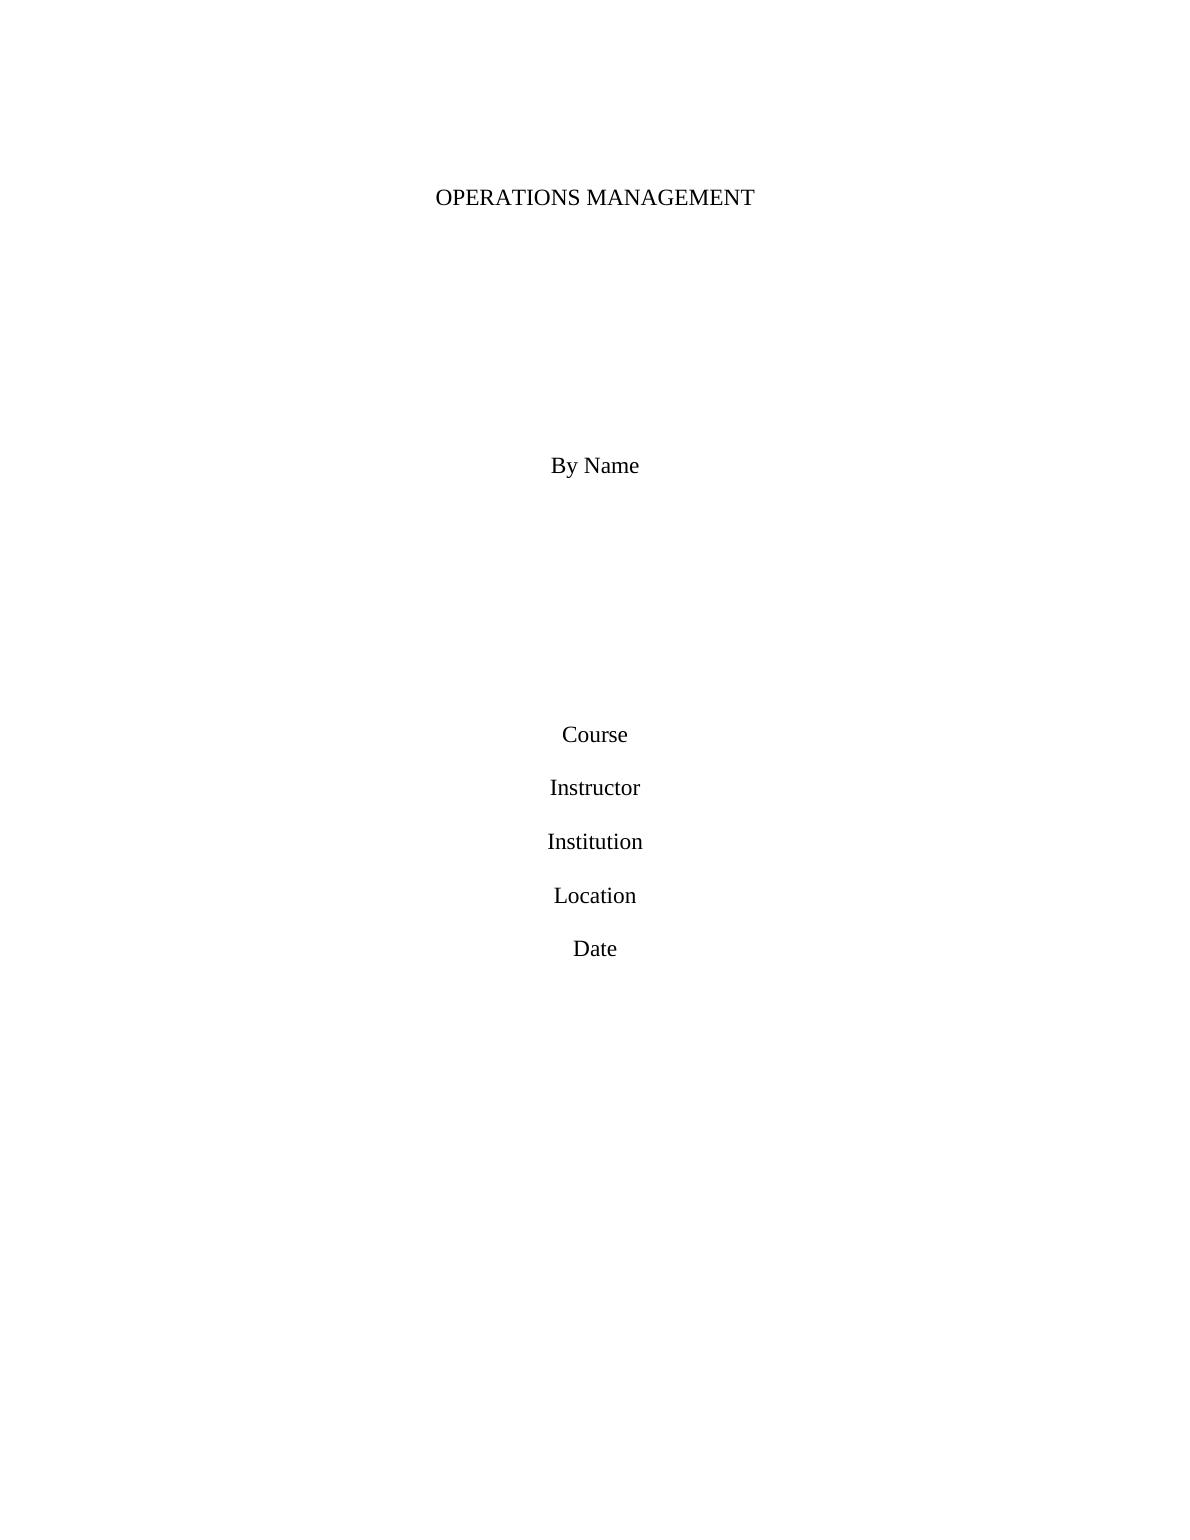 Operations Management Sample Assignment (Doc)_1